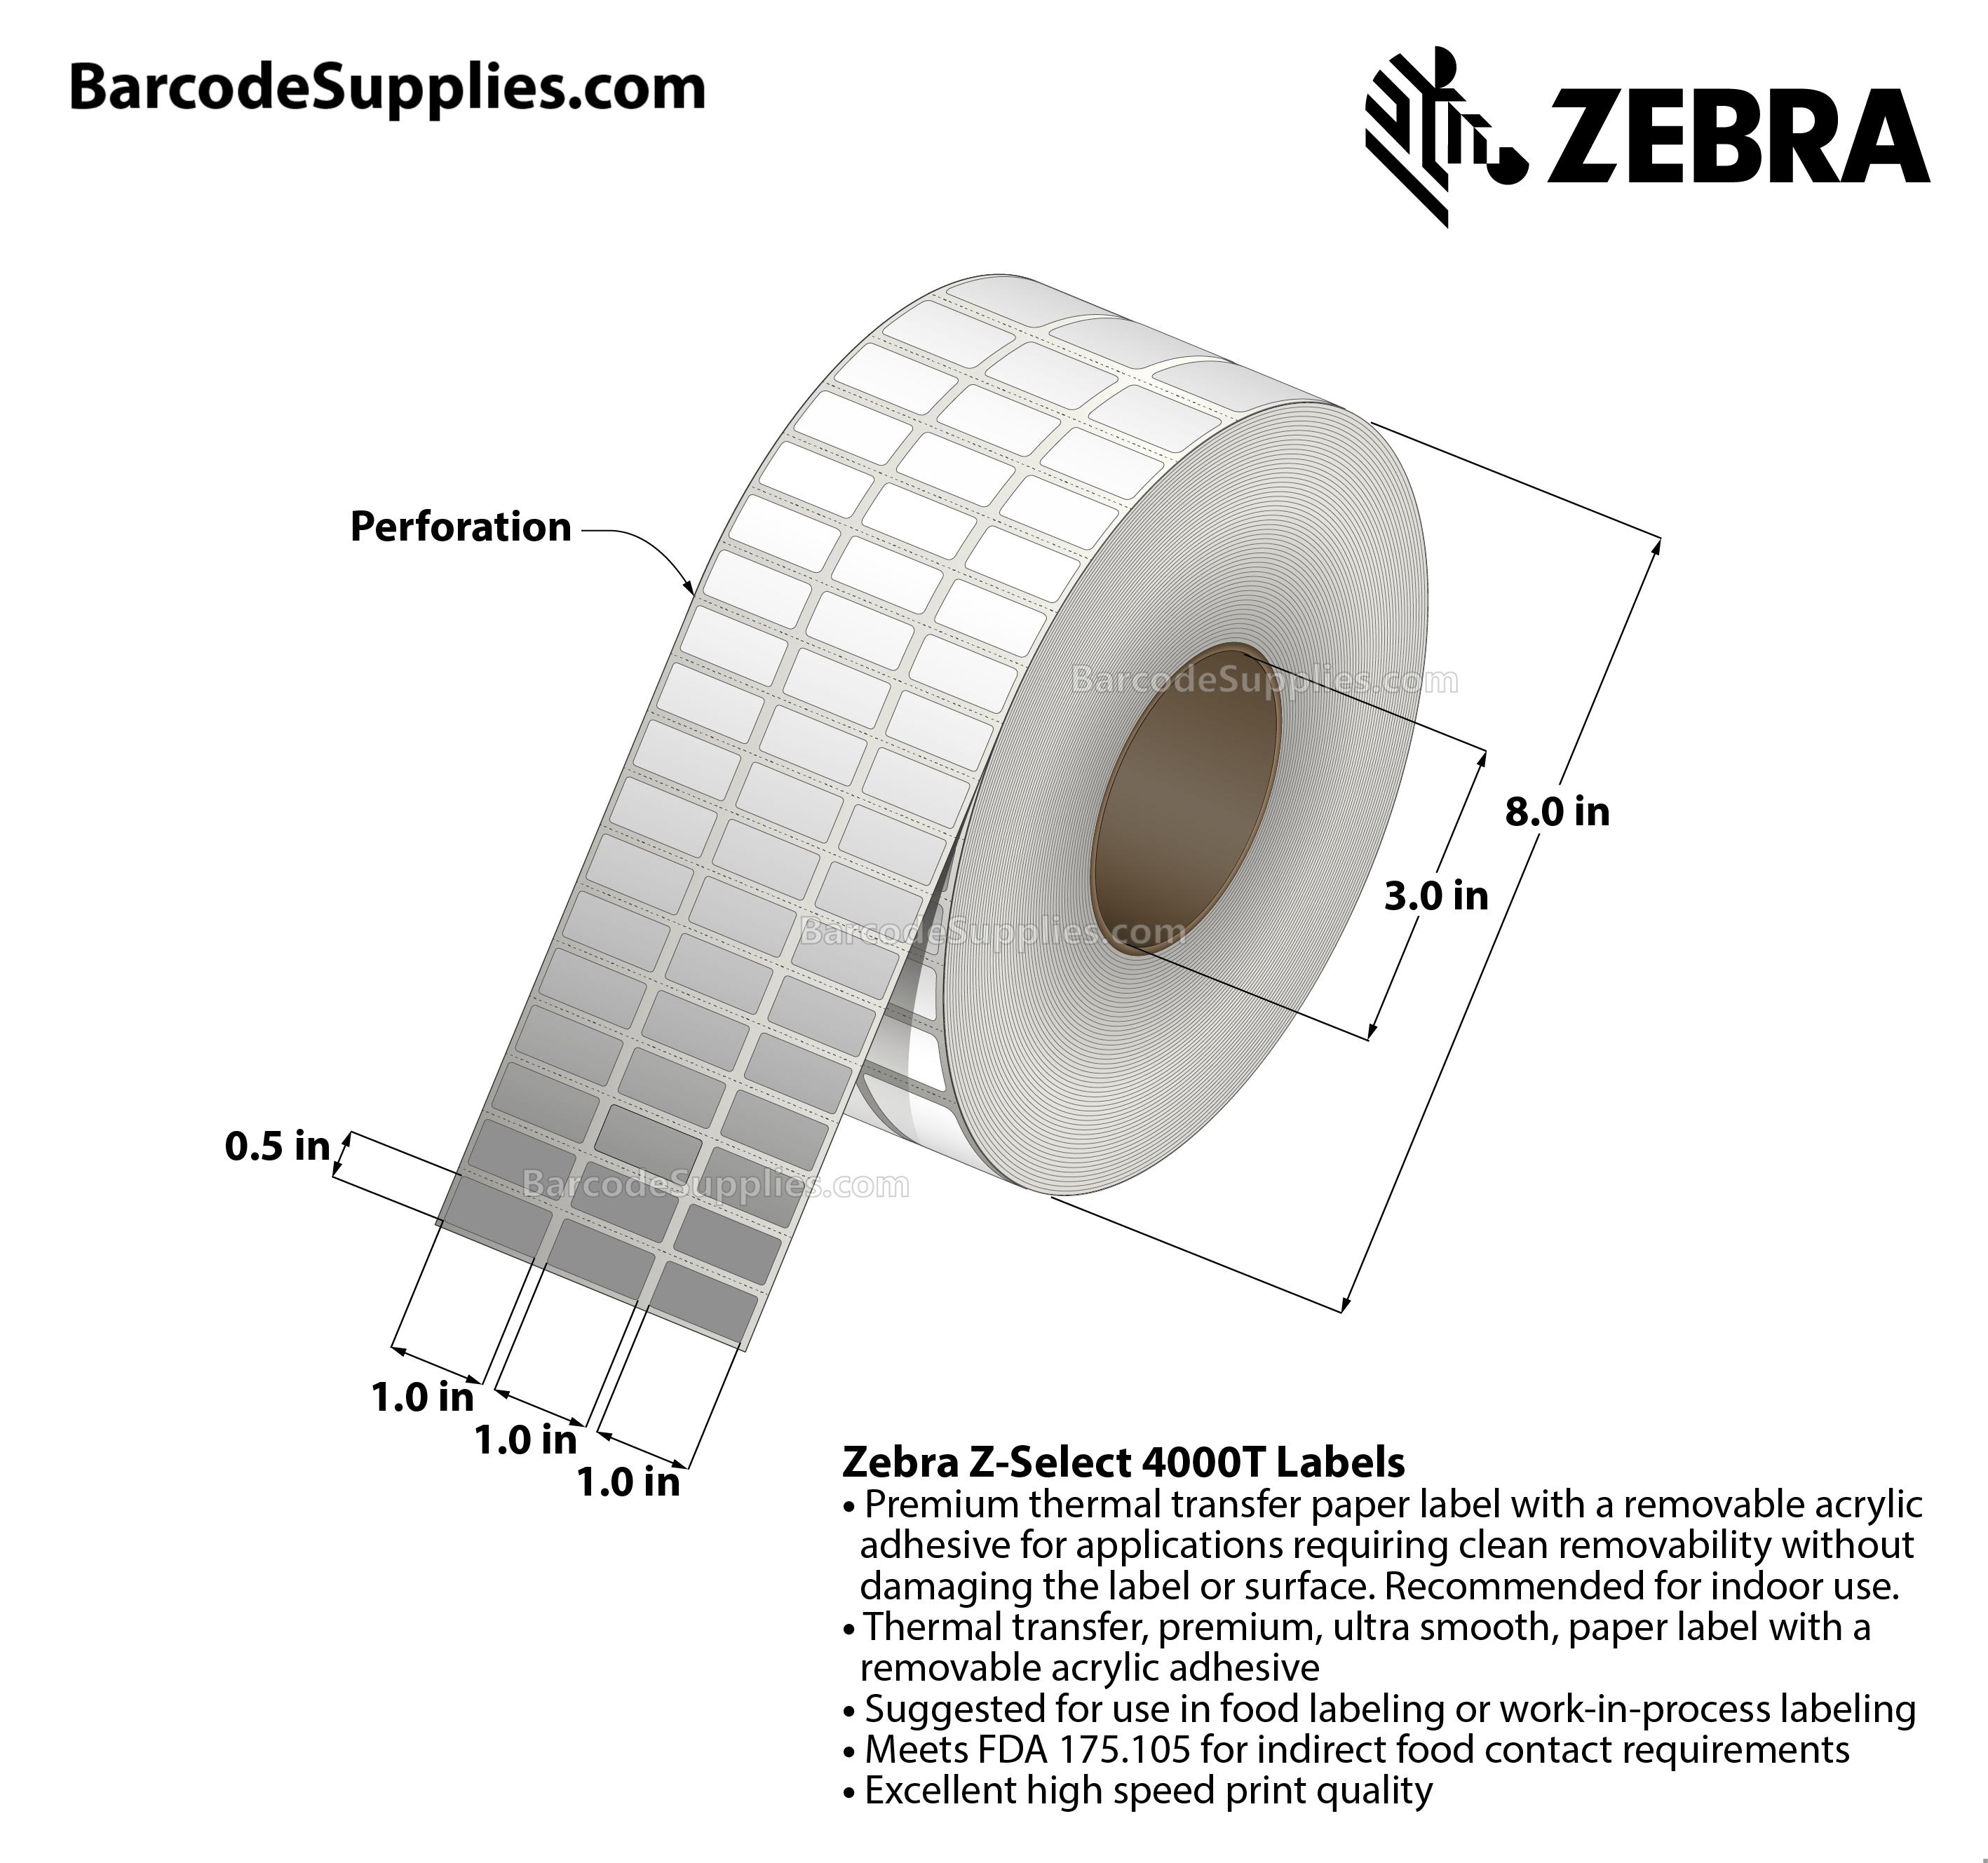 1 x 0.5 Thermal Transfer White PolyPro 4000T Removable (3-Across) Labels With Removable Adhesive - Perforated - 10002 Labels Per Roll - Carton Of 1 Rolls - 10002 Labels Total - MPN: 10022930